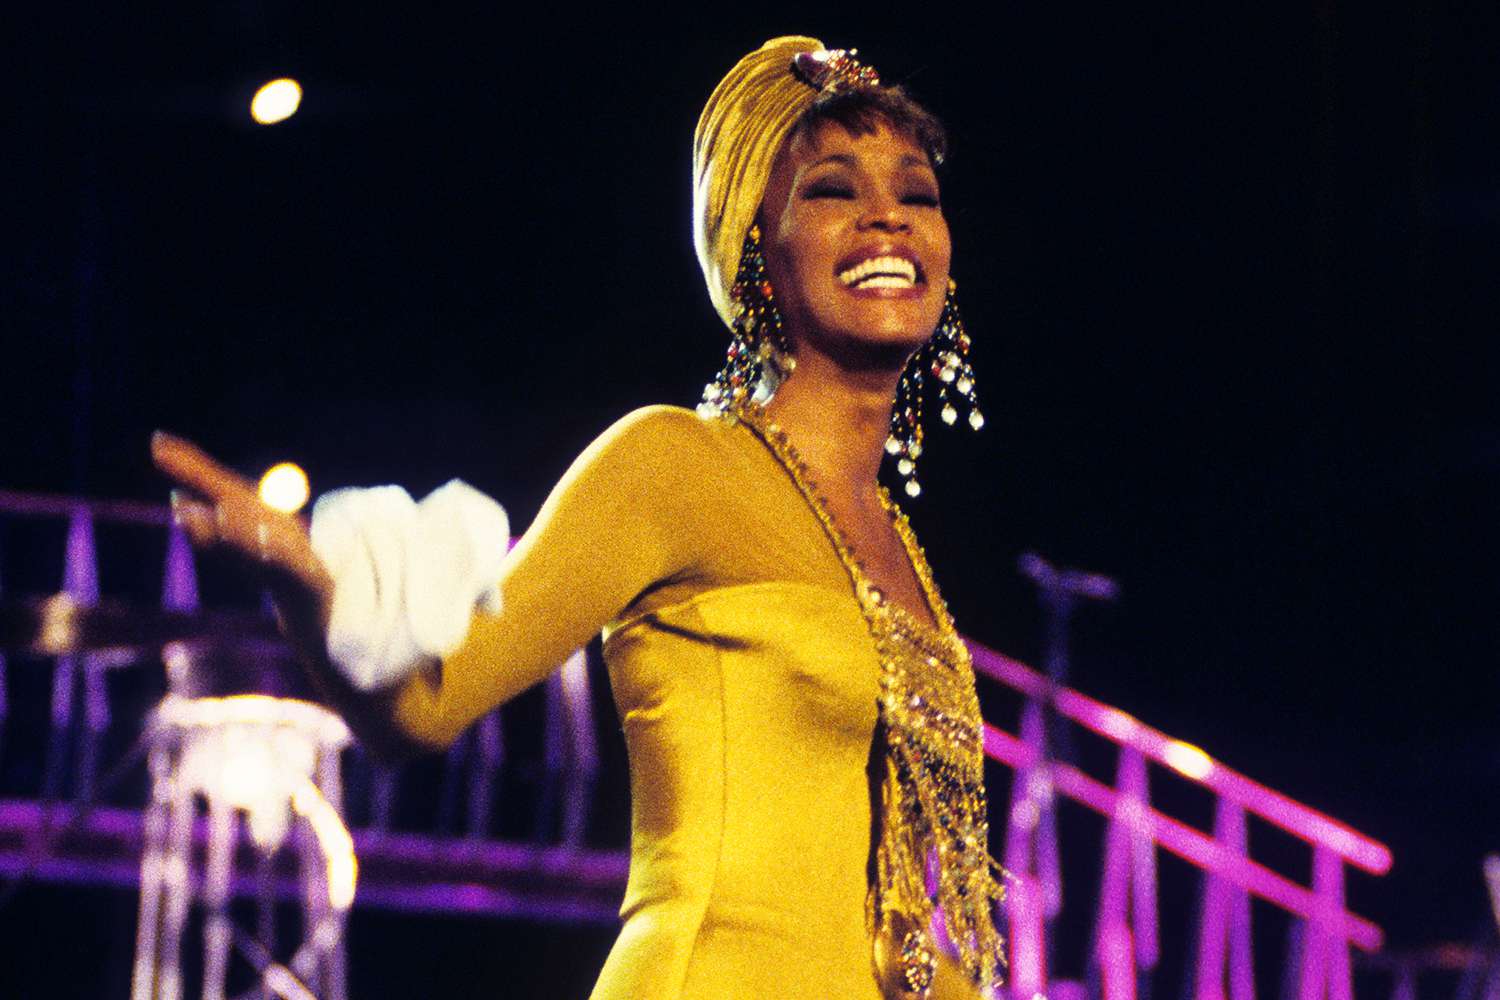 Whitney Houston Legacy Foundation to Hold 3rd Annual Gala to Celebrate Late Icon's Historical Visit to South Africa